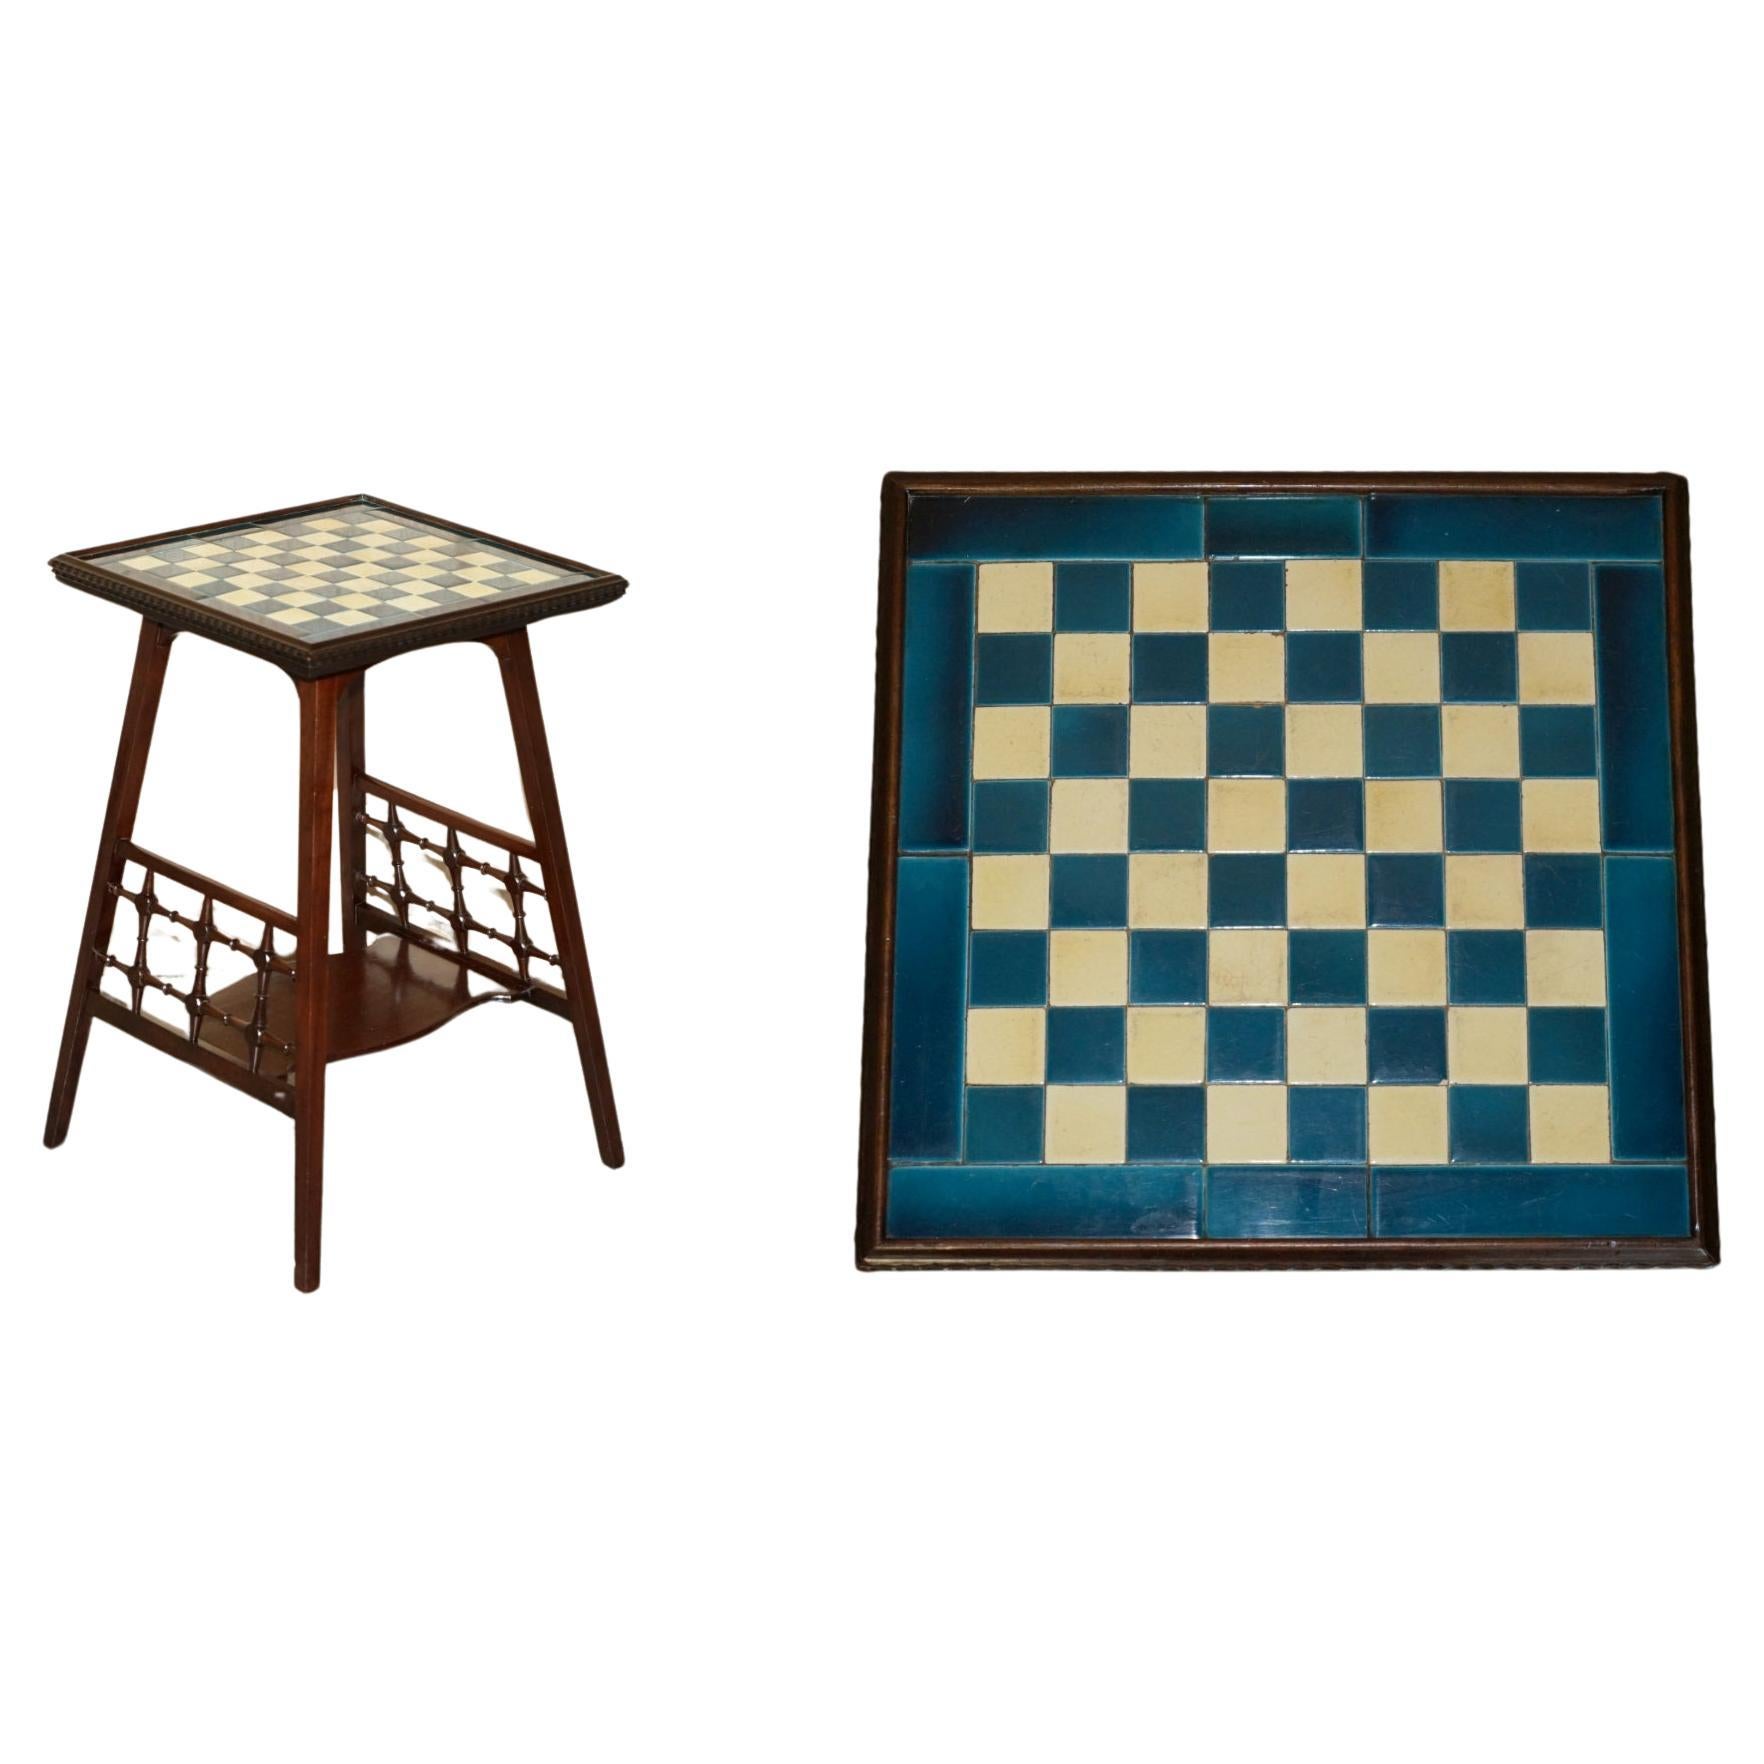 ANTIQUE VICTORIAN AESTHETIC MOVEMENT STYLE TiLED TOP CHESSBOARD CHESS TABLE For Sale